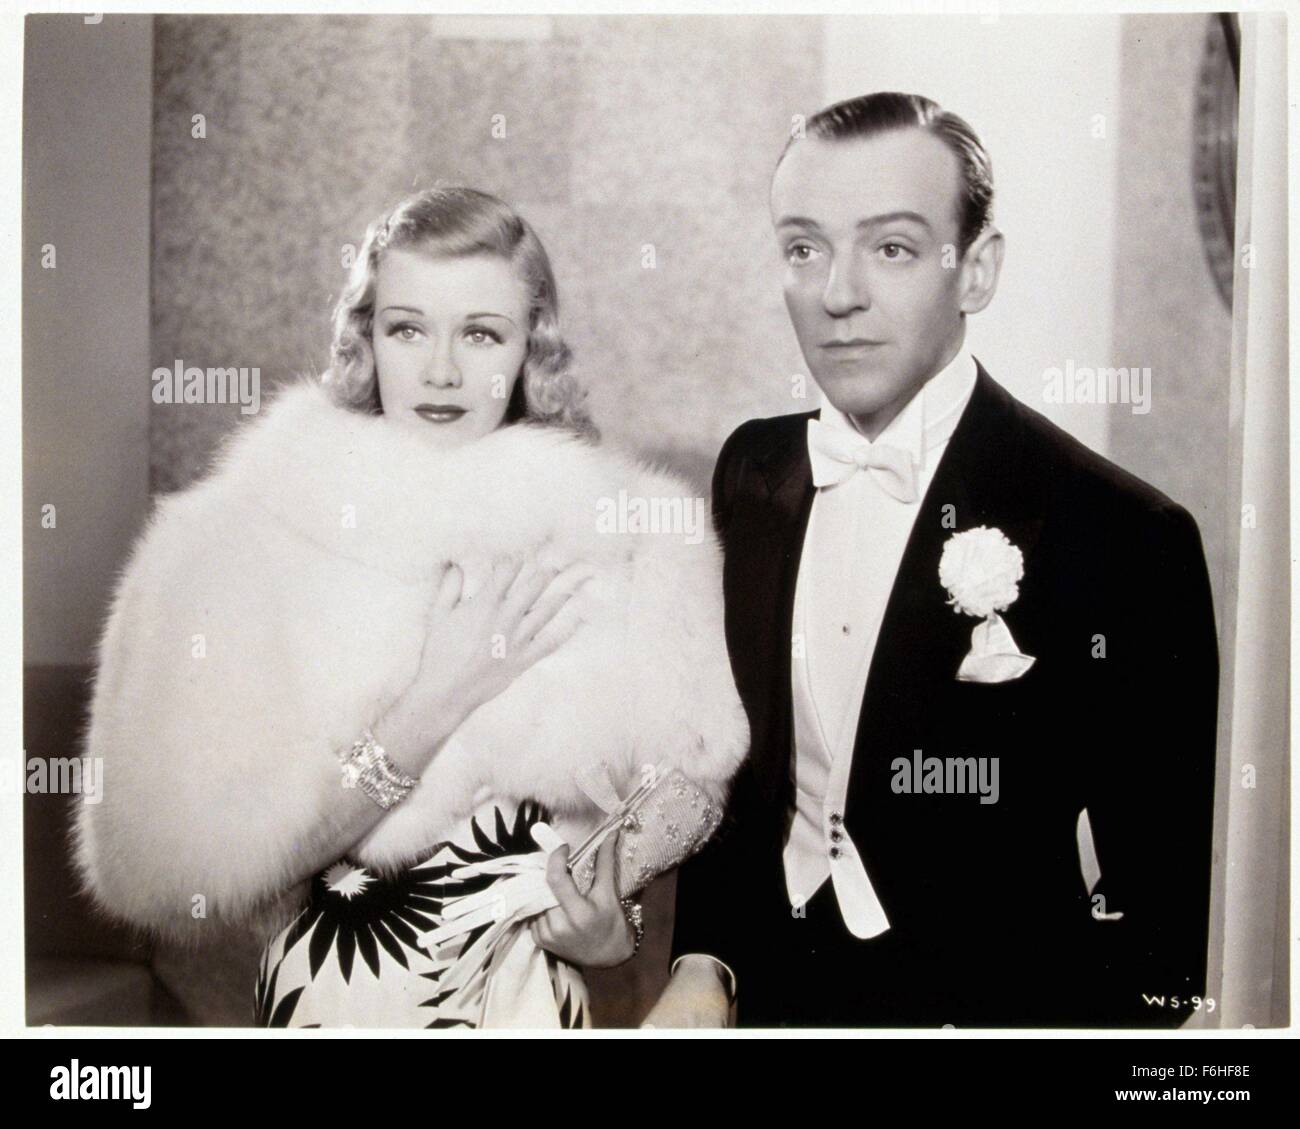 1937, Film Title: SHALL WE DANCE, Director: MARK SANDRICH, Studio: RKO, Pictured: FRED ASTAIRE, GINGER ROGERS. (Credit Image: SNAP) Stock Photo